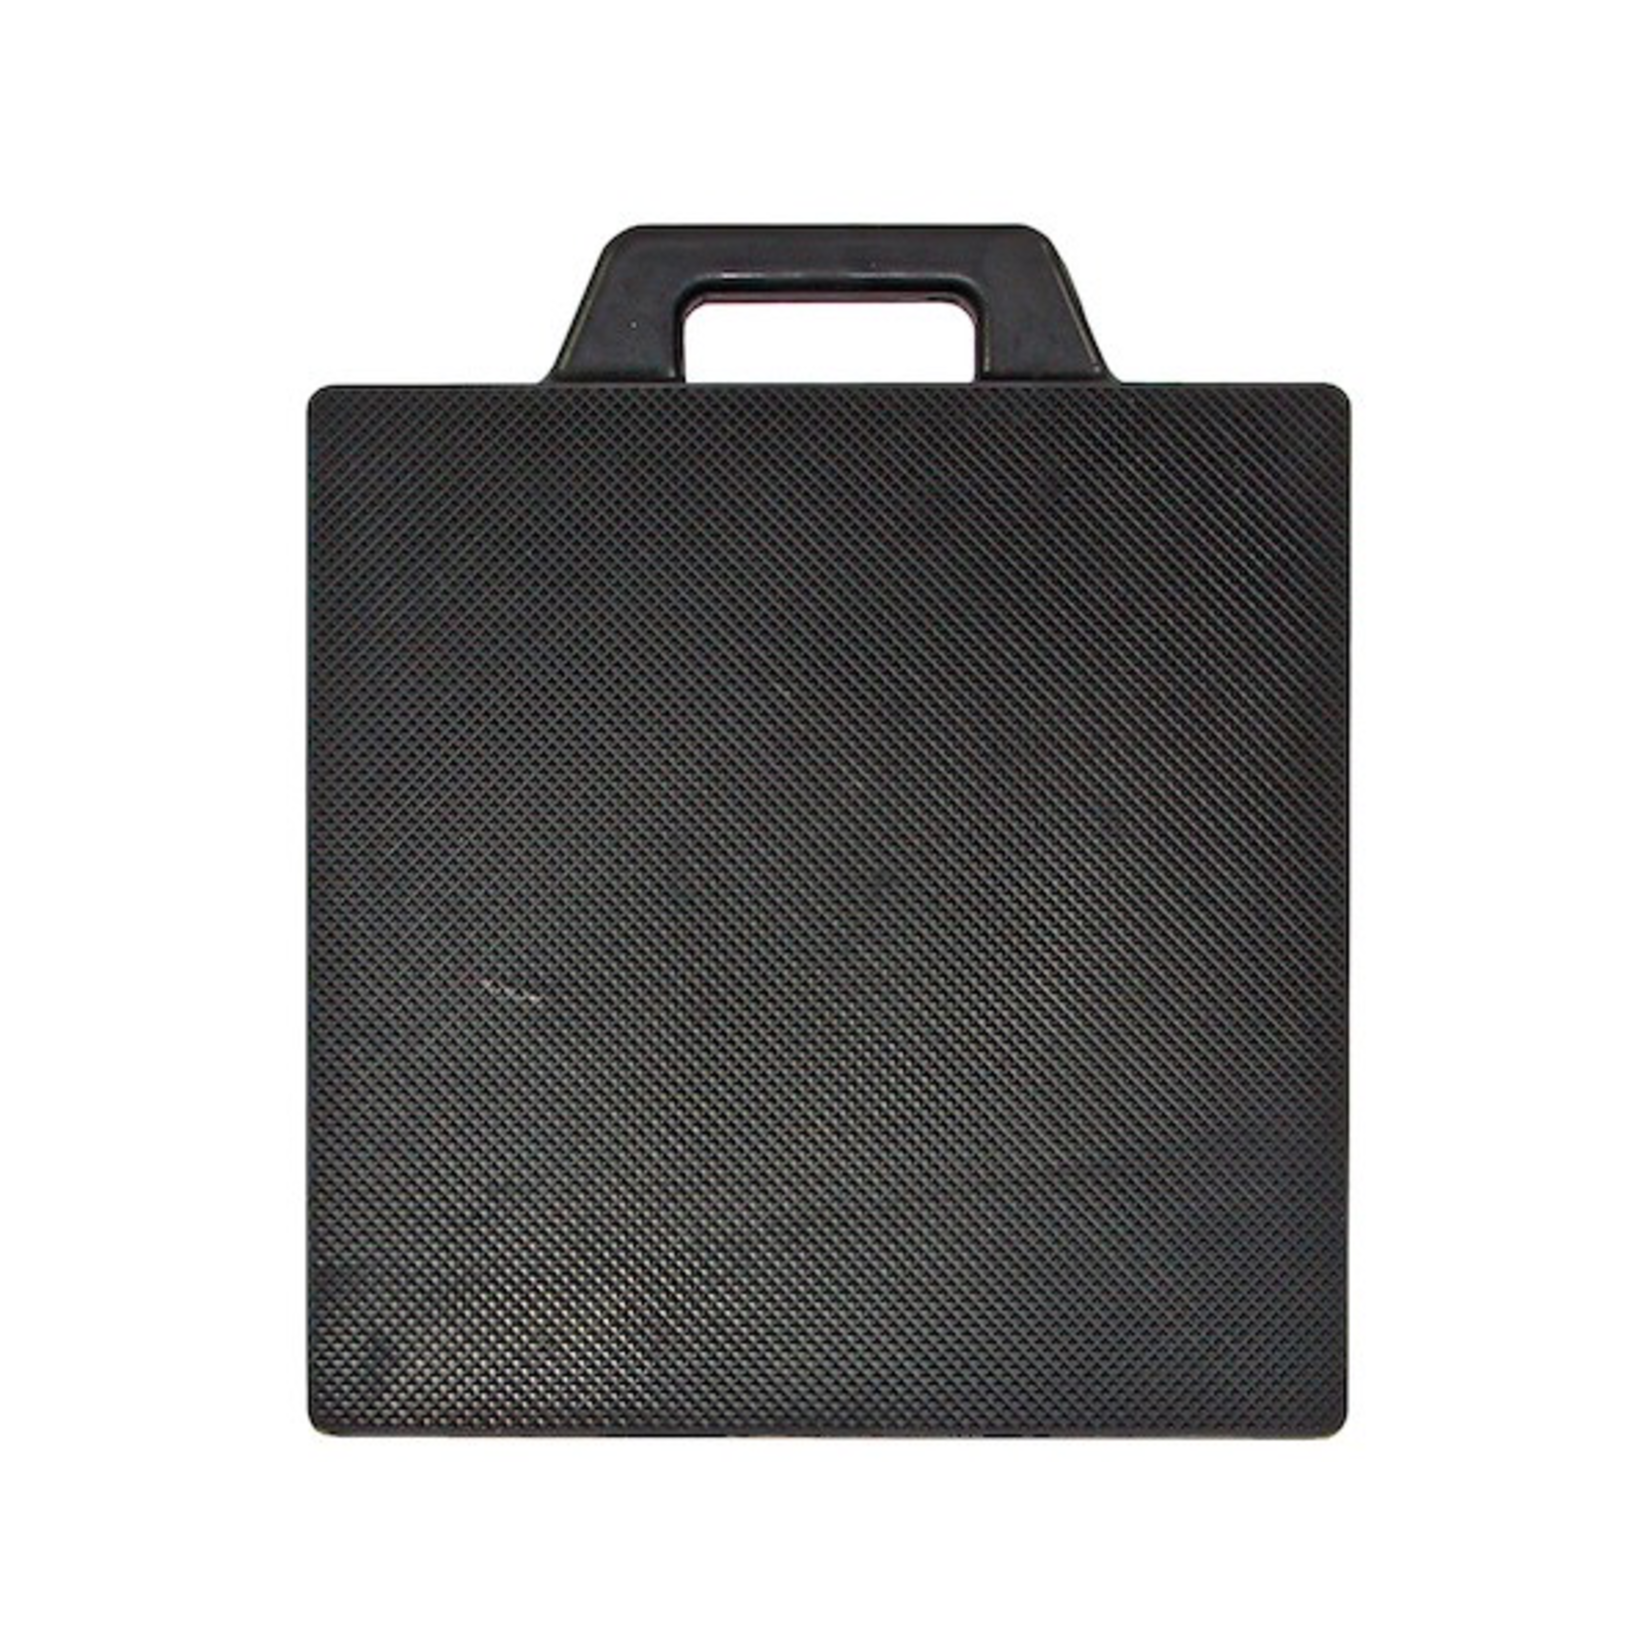 Buyers Outrigger Pad 18" x 18" Constructed from 2" Solid Rubber with Textured Surface and a Built-In Handle